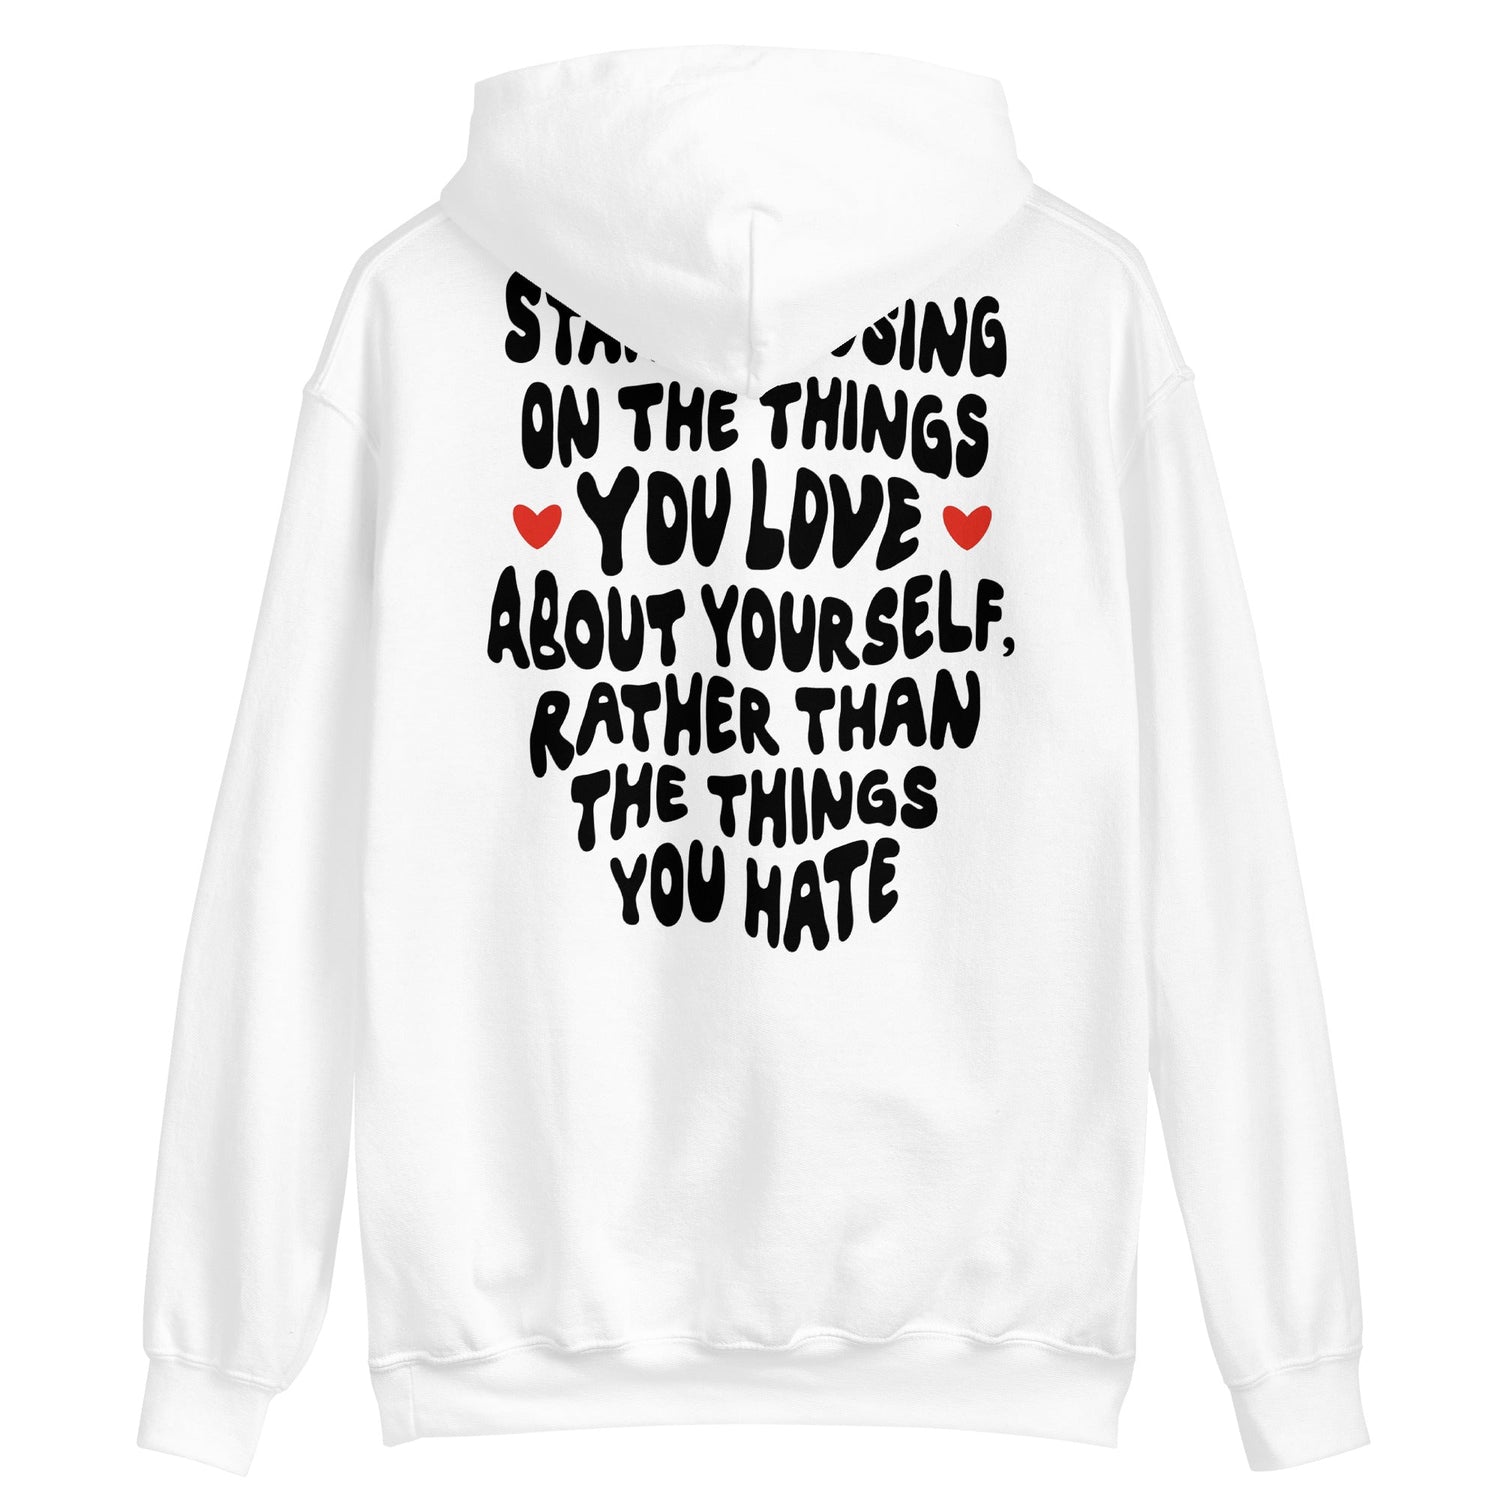 Start Focusing On The Things You Love About Yourself Unisex Hoodie - Cotton Plus Cream